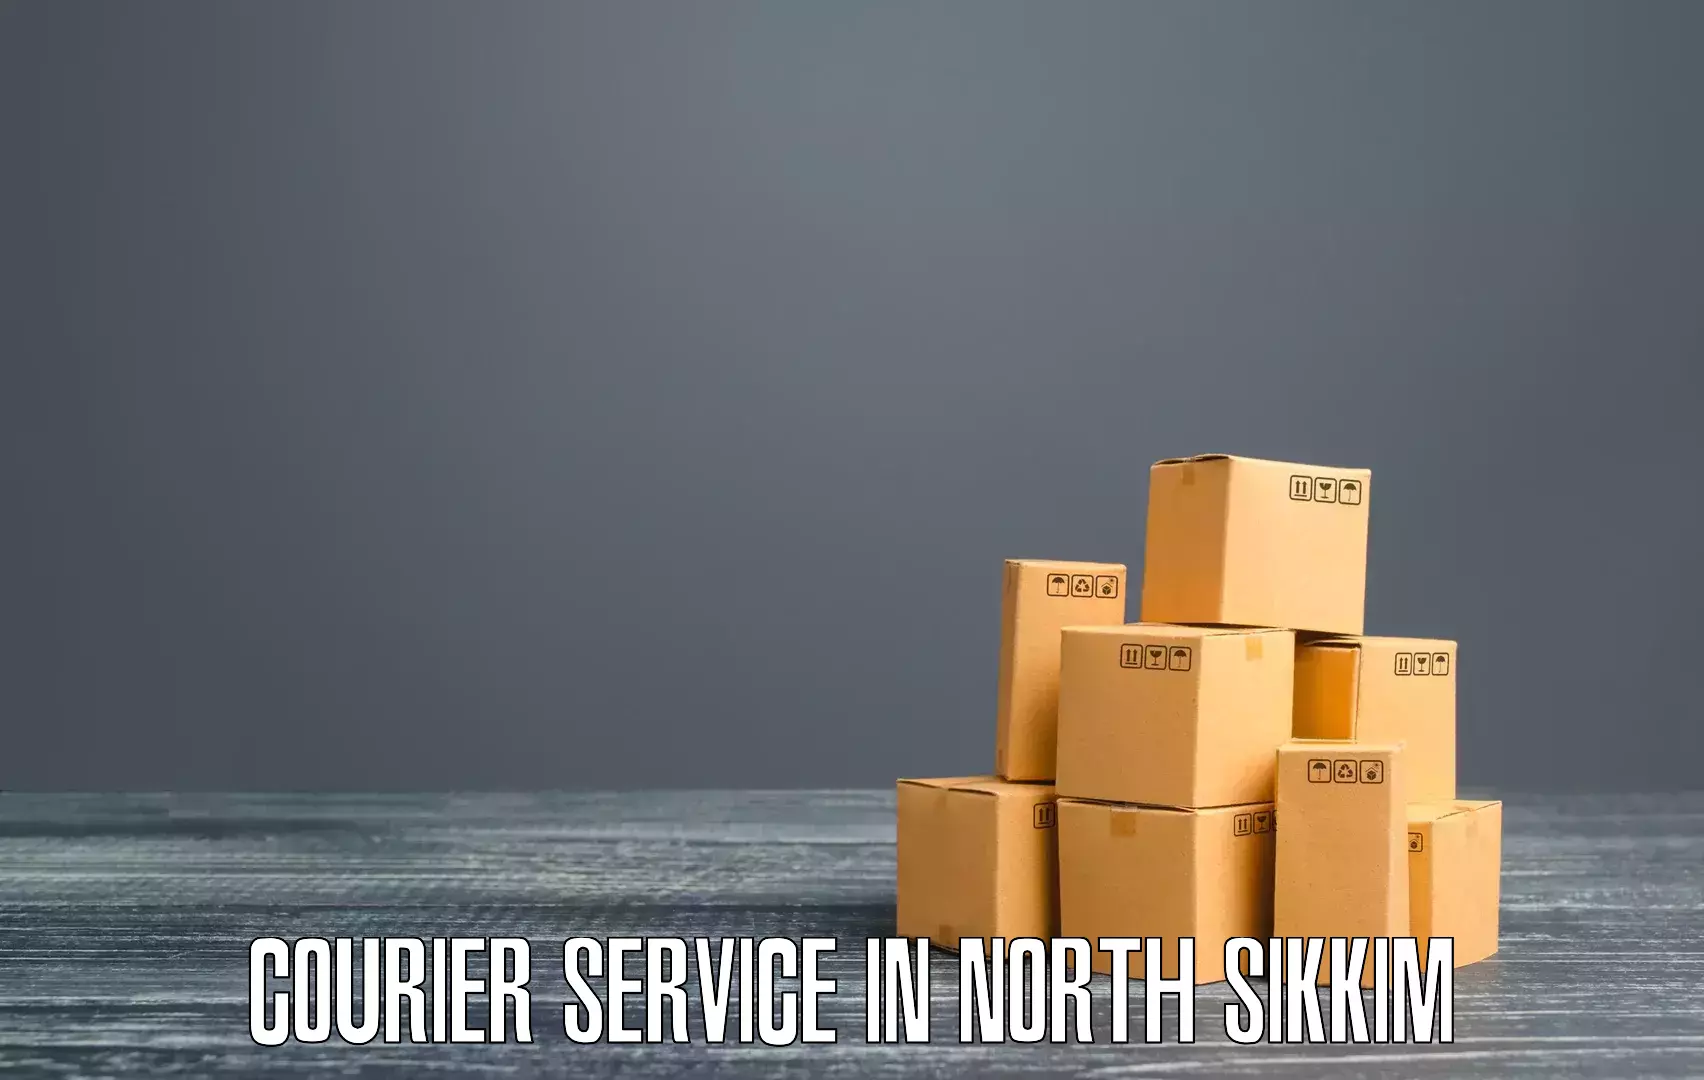 Smart shipping technology in North Sikkim